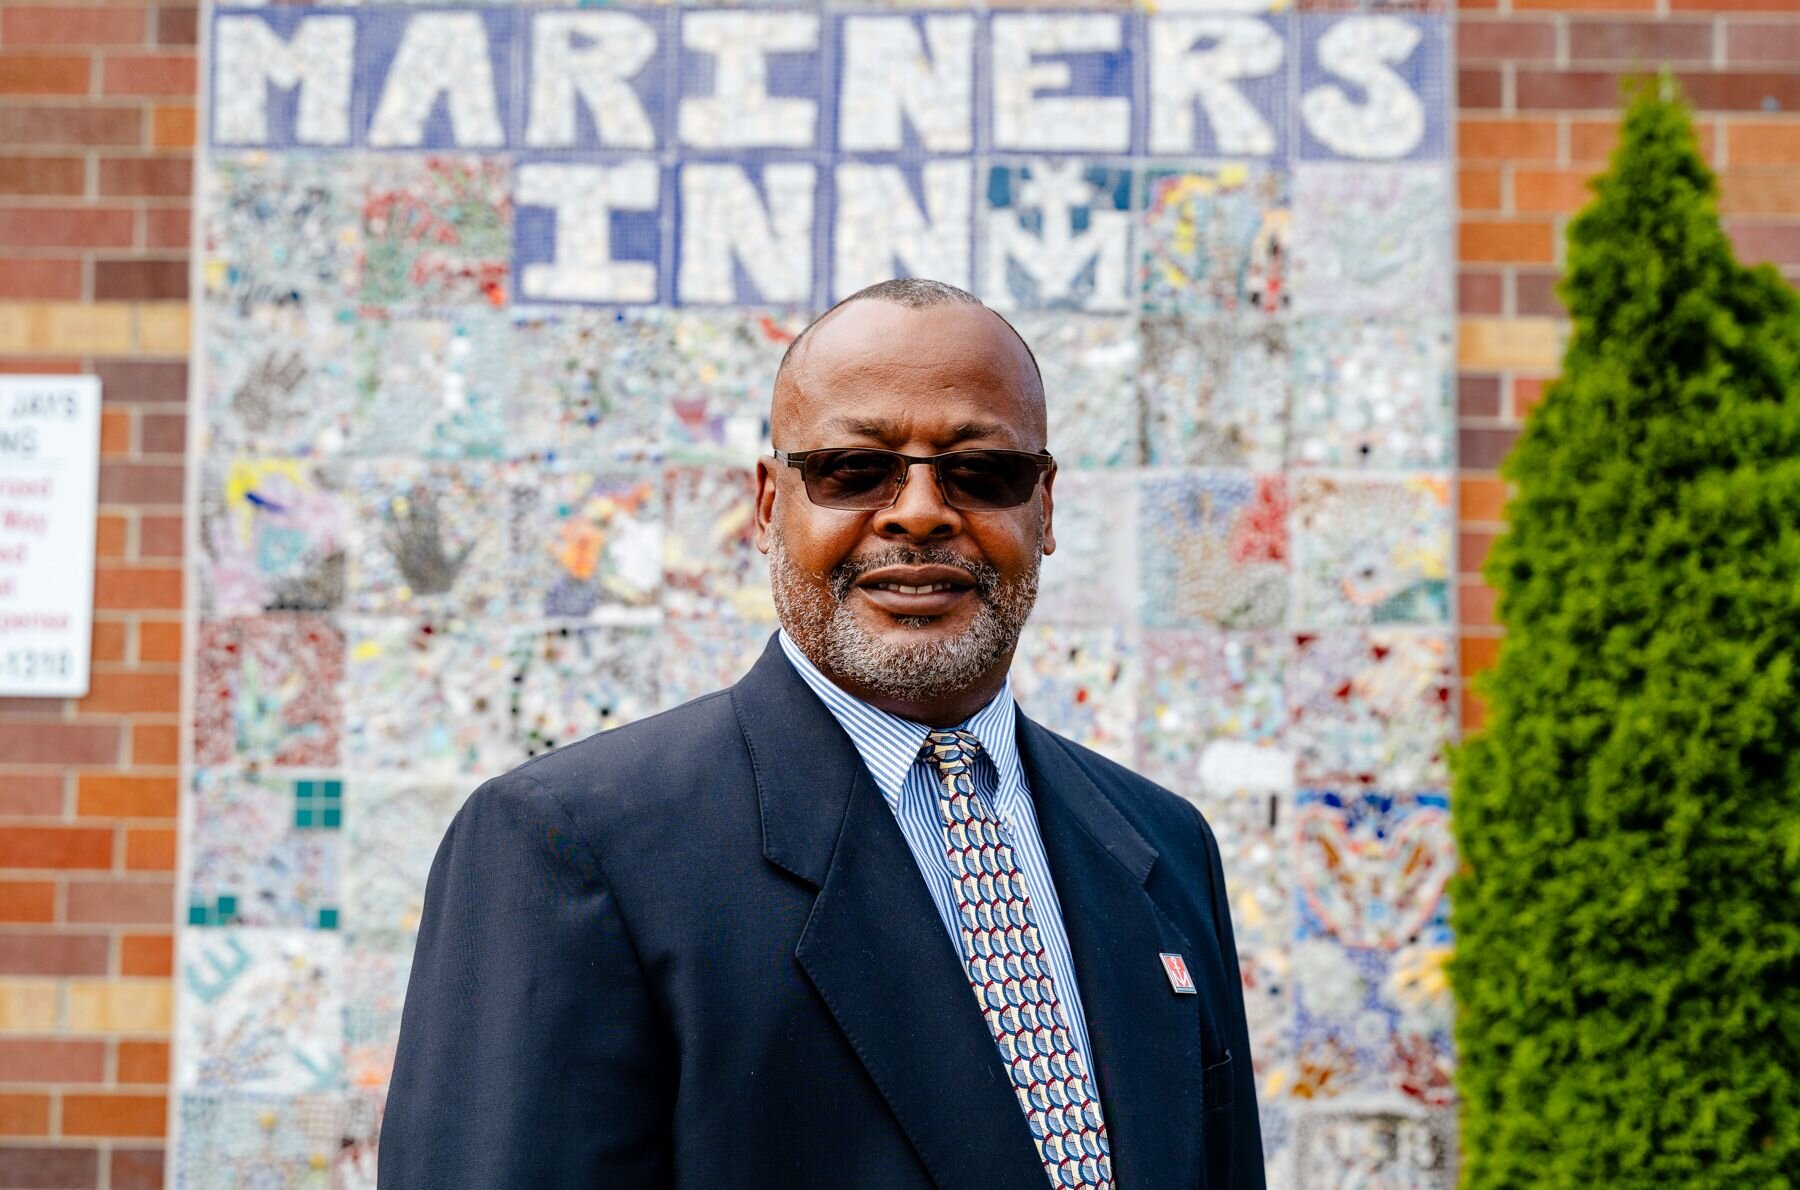 David Sampson, CEO of Mariners Inn, stands in front of a building that is part of a redevelopment project that will enable his organization to provide seamless transitions to affordable housing for the clients served.